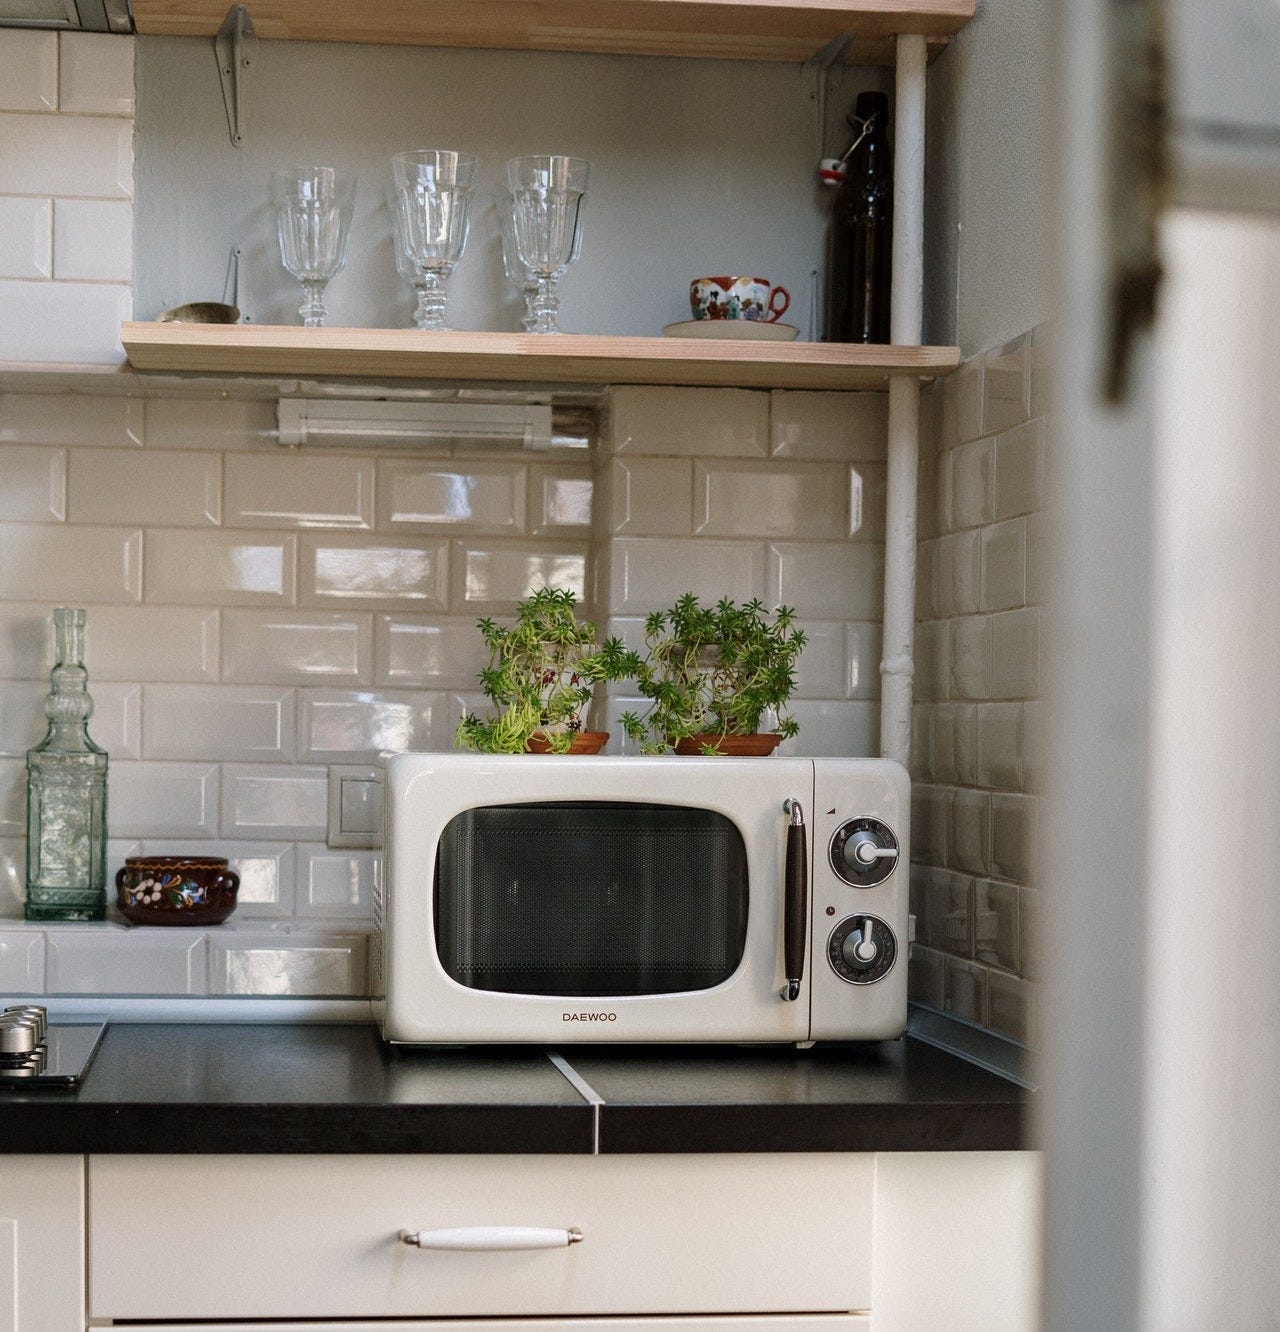 Image of a white Daewoo brand microwave on a black kitchen countertop with a white tile backsplash.